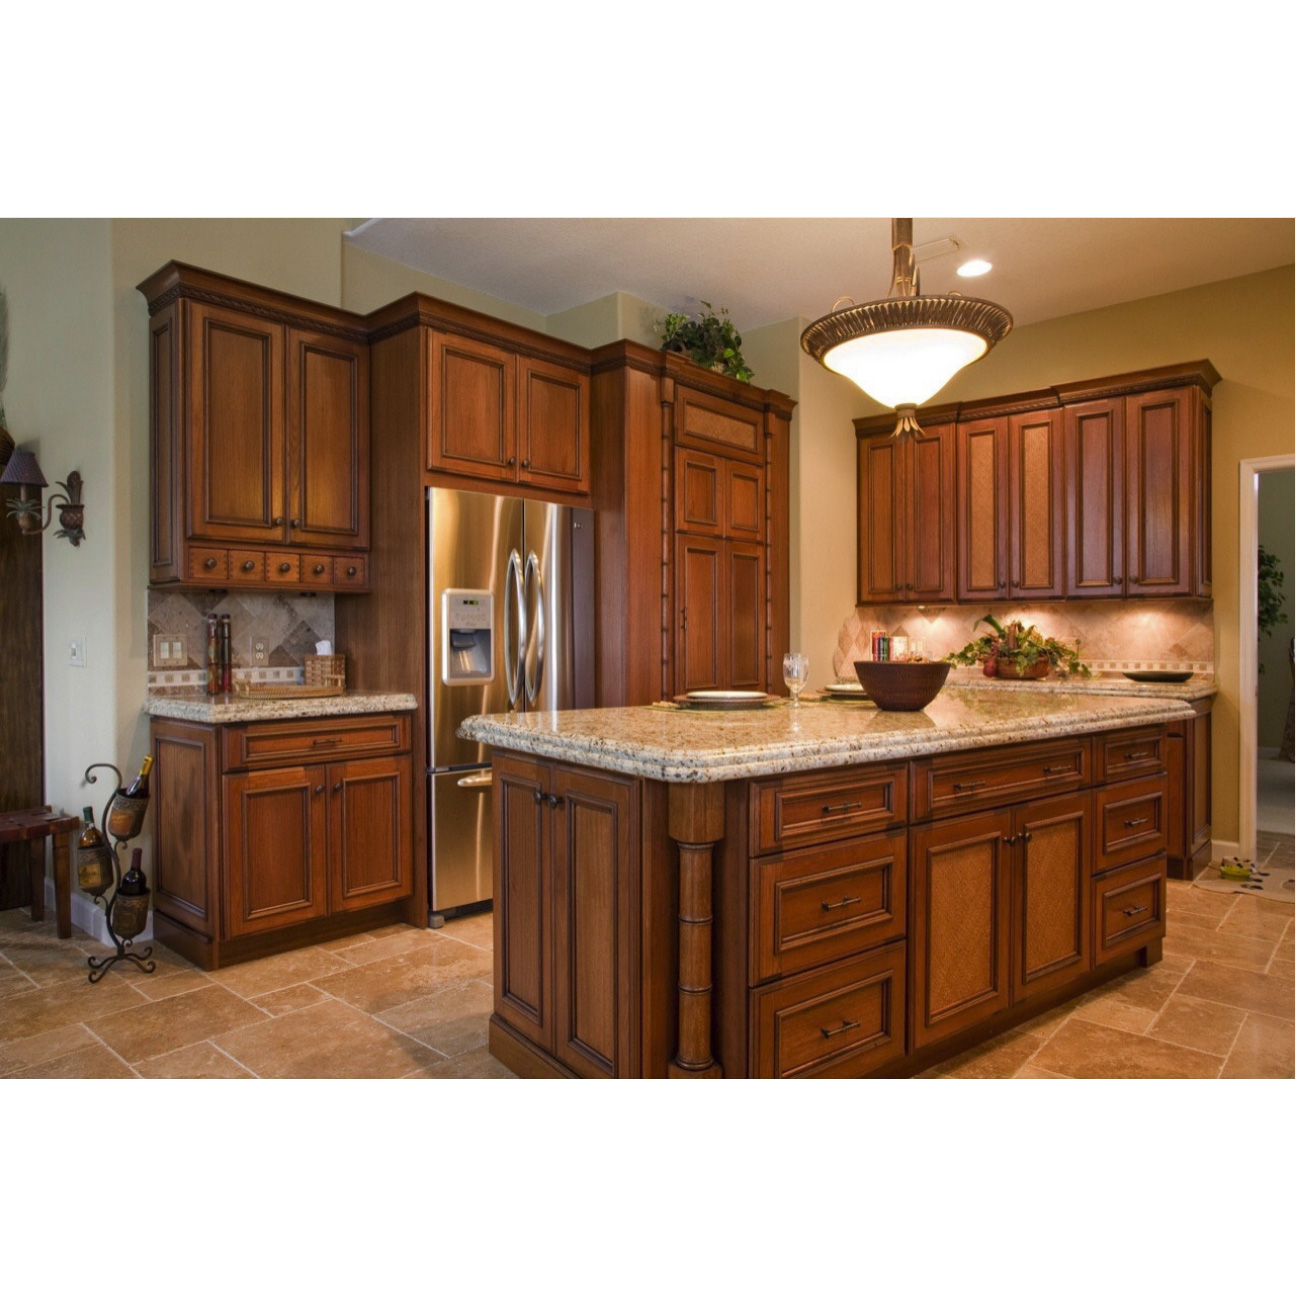 AisDecor cherry kitchen cabinets one-stop services-2